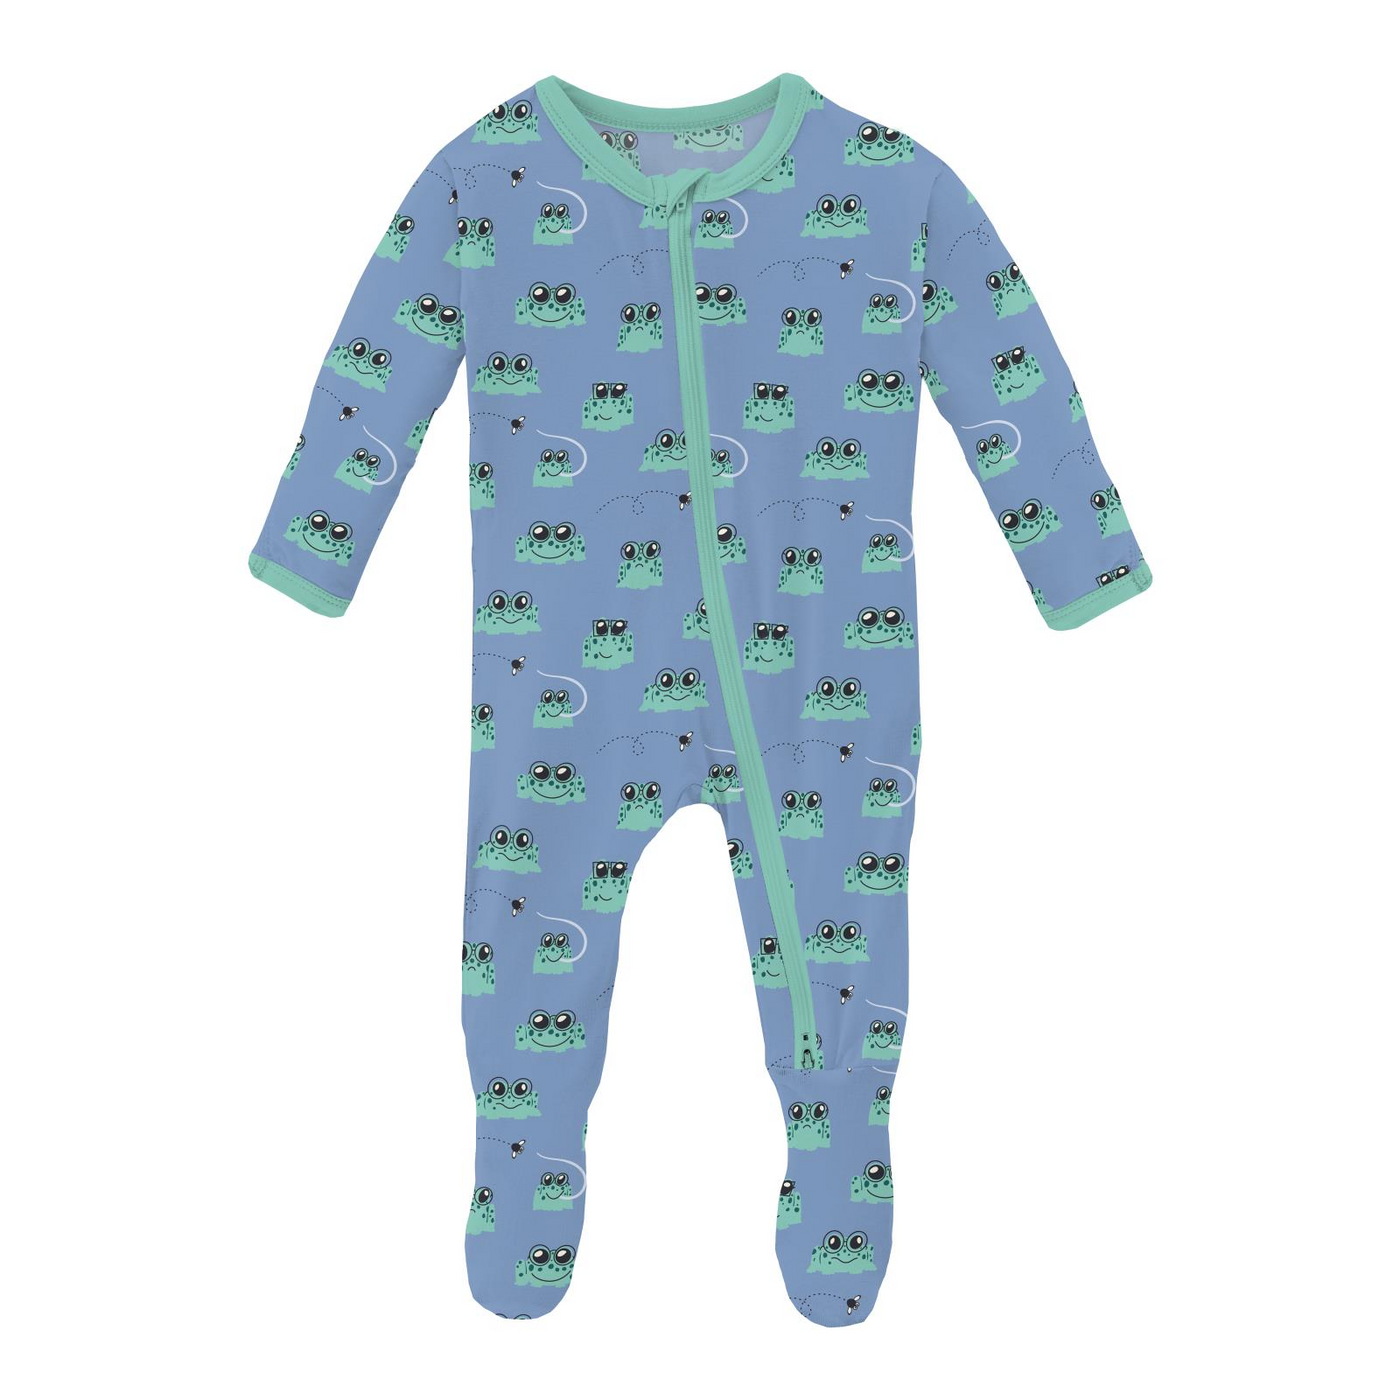 Kickee Pants Footie With 2 Way Zipper: Dream Blue Bespeckled Frogs  (Ships 5/15-6/15)